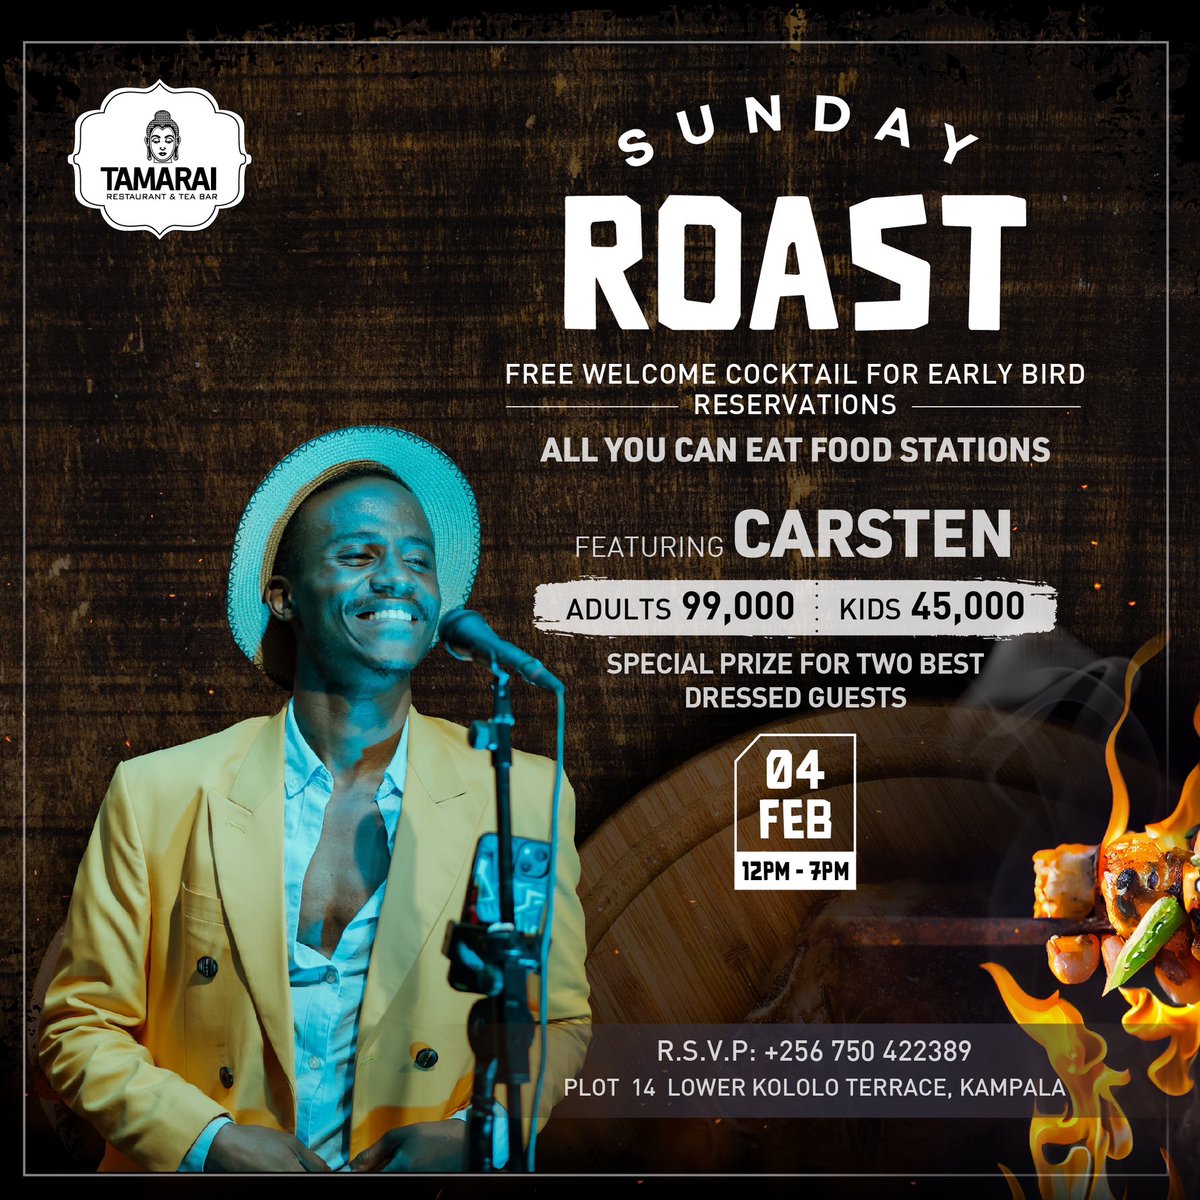 The vibes masters list is here. 👏🏽👏🏽Wherever @ ashley @DjRoja and @carstenyct are, the party follows. 4th February: Sunday Roast is where the party is at. 🥂🥂 Join us for bottomless brunch with diverse Asian cuisine! 📞 0755 794 960 #brunching #kampalabrunch #sundayroast